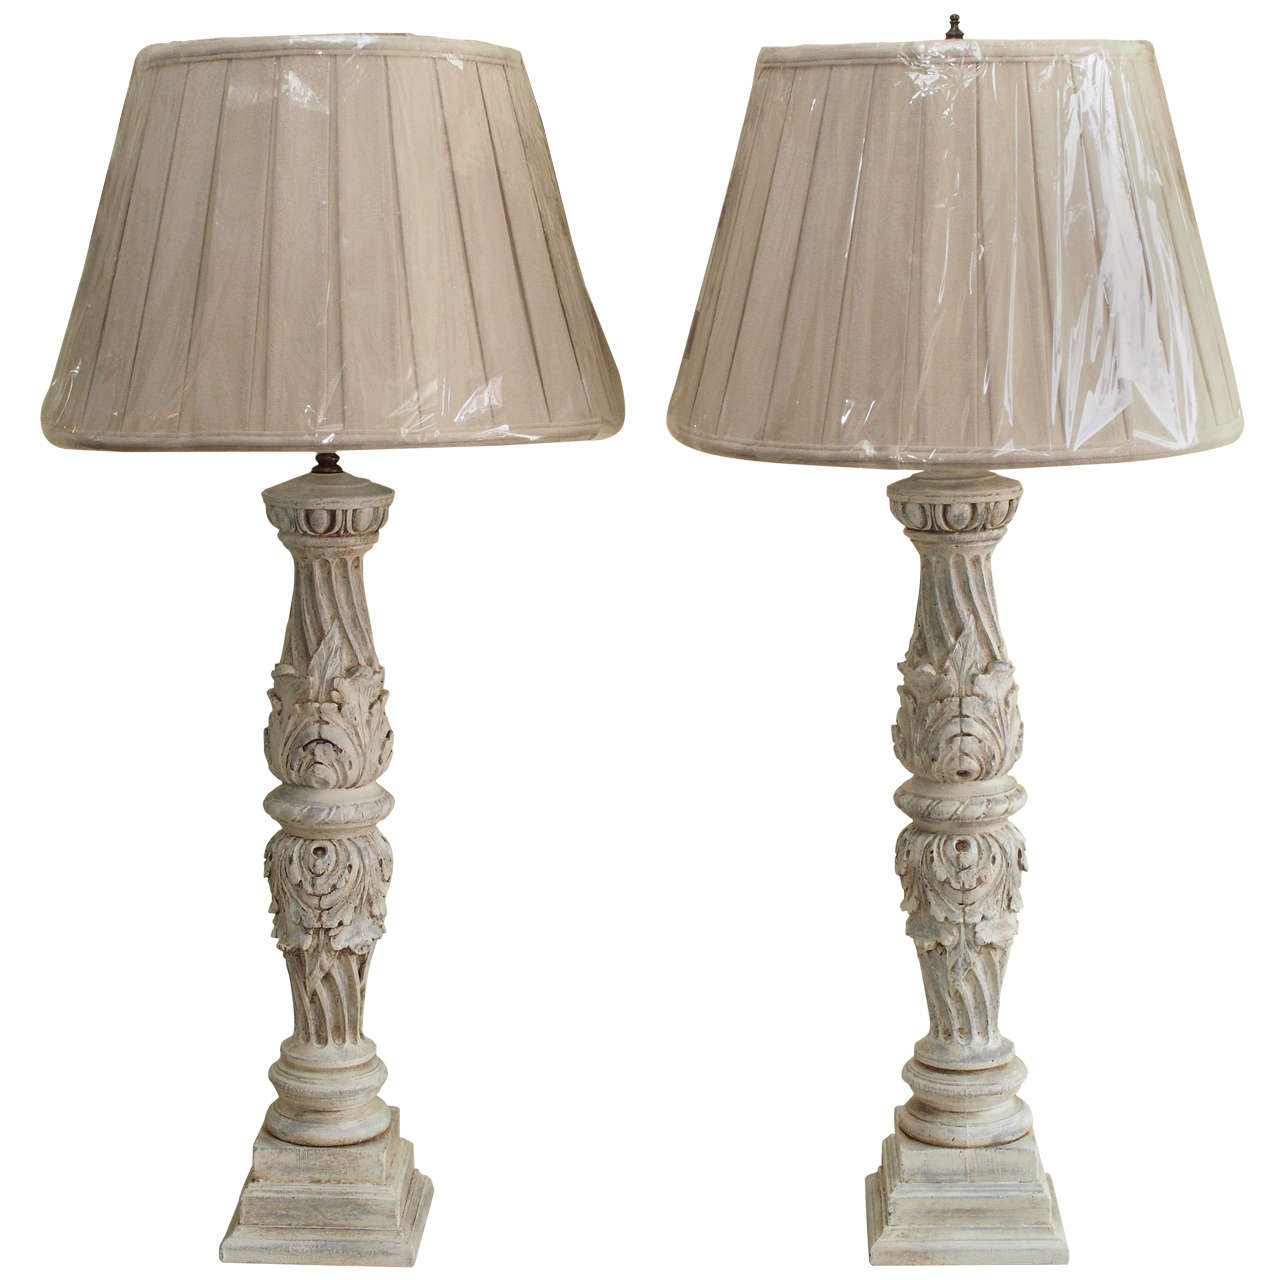 Pair of Lamps Made from Vintage Fragements